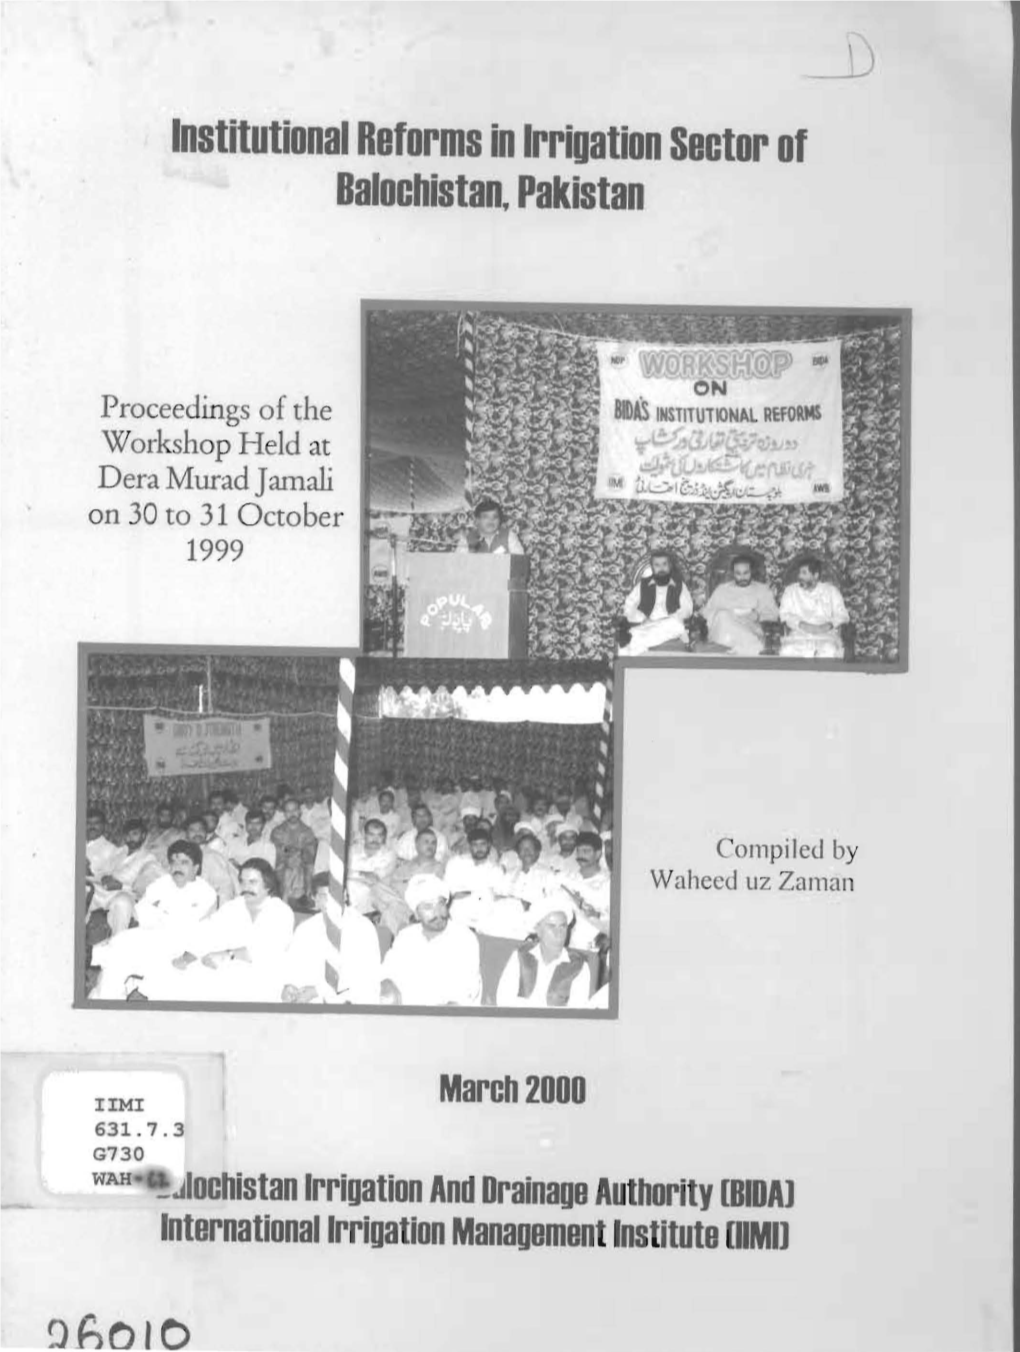 Institutional Reforms in Irrigation Sector of Balochistan, Pakistan